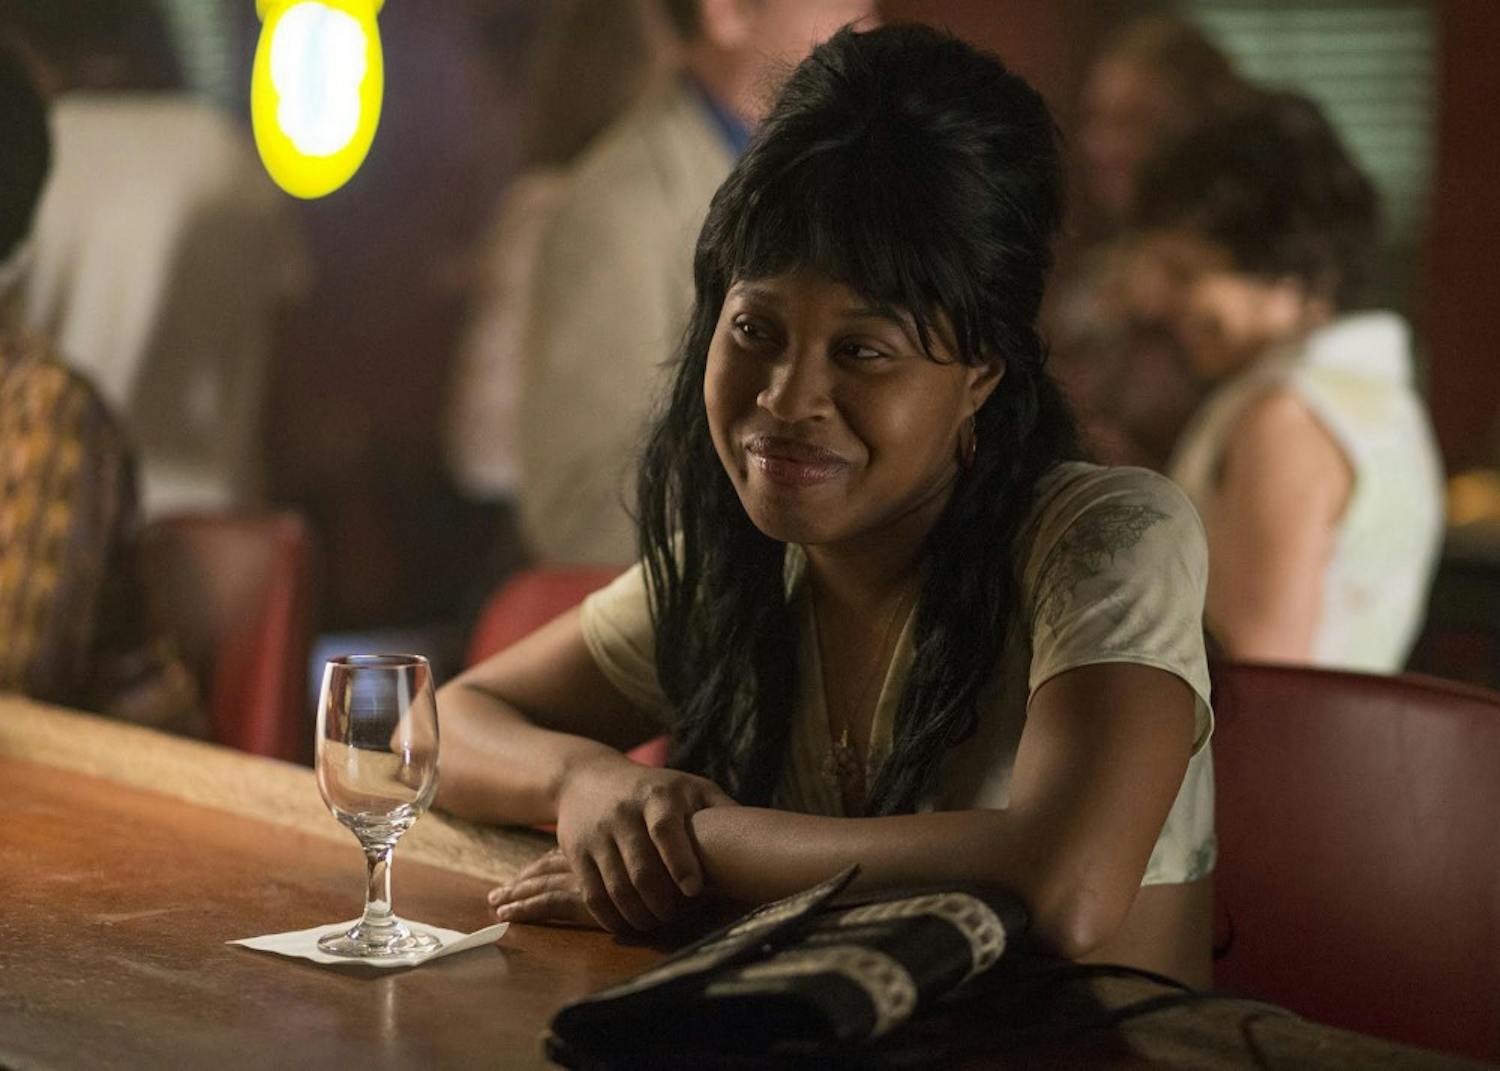 Dominique Fishback stars in the HBO show “The Deuce." Fishback, who is a Pace University graduate, plays a prostitute named Darlene on the show.